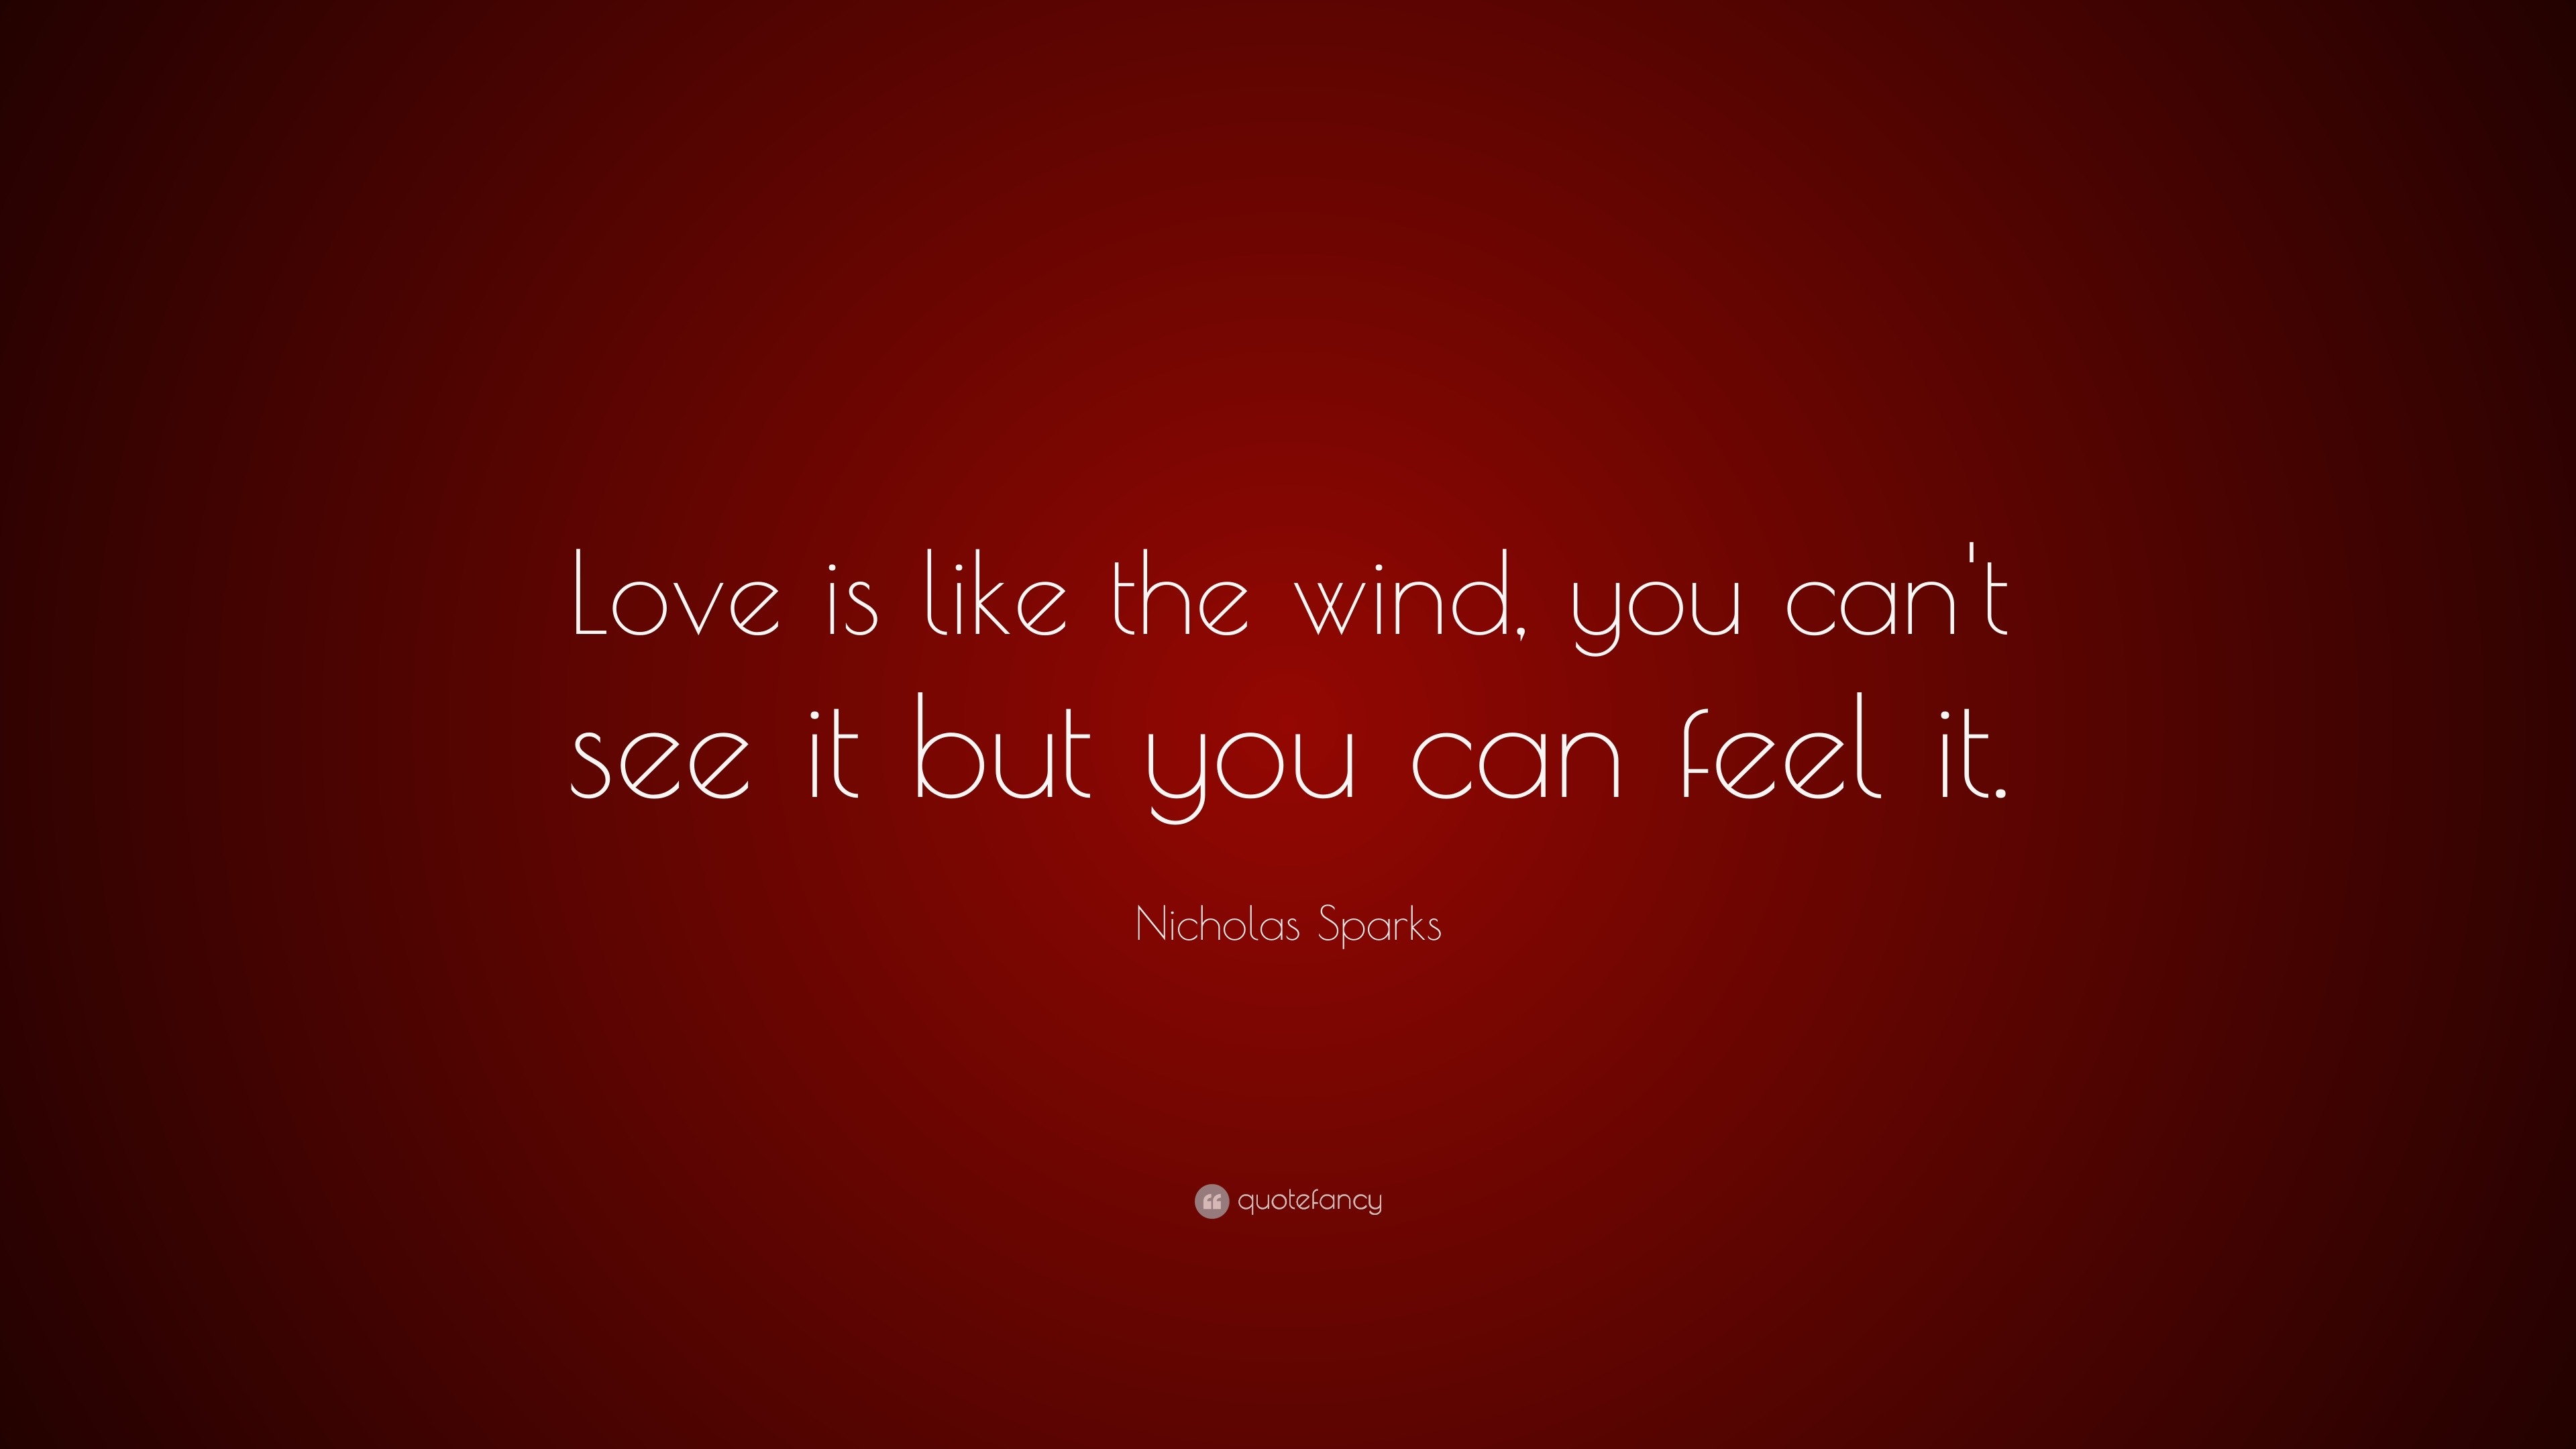 Nicholas Sparks Quote “Love Is Like The Wind You Can t See It 5908 Nicholas Sparks Quote Love Is Like The Wind You Can T See It But Nicholas Sparks Love Is